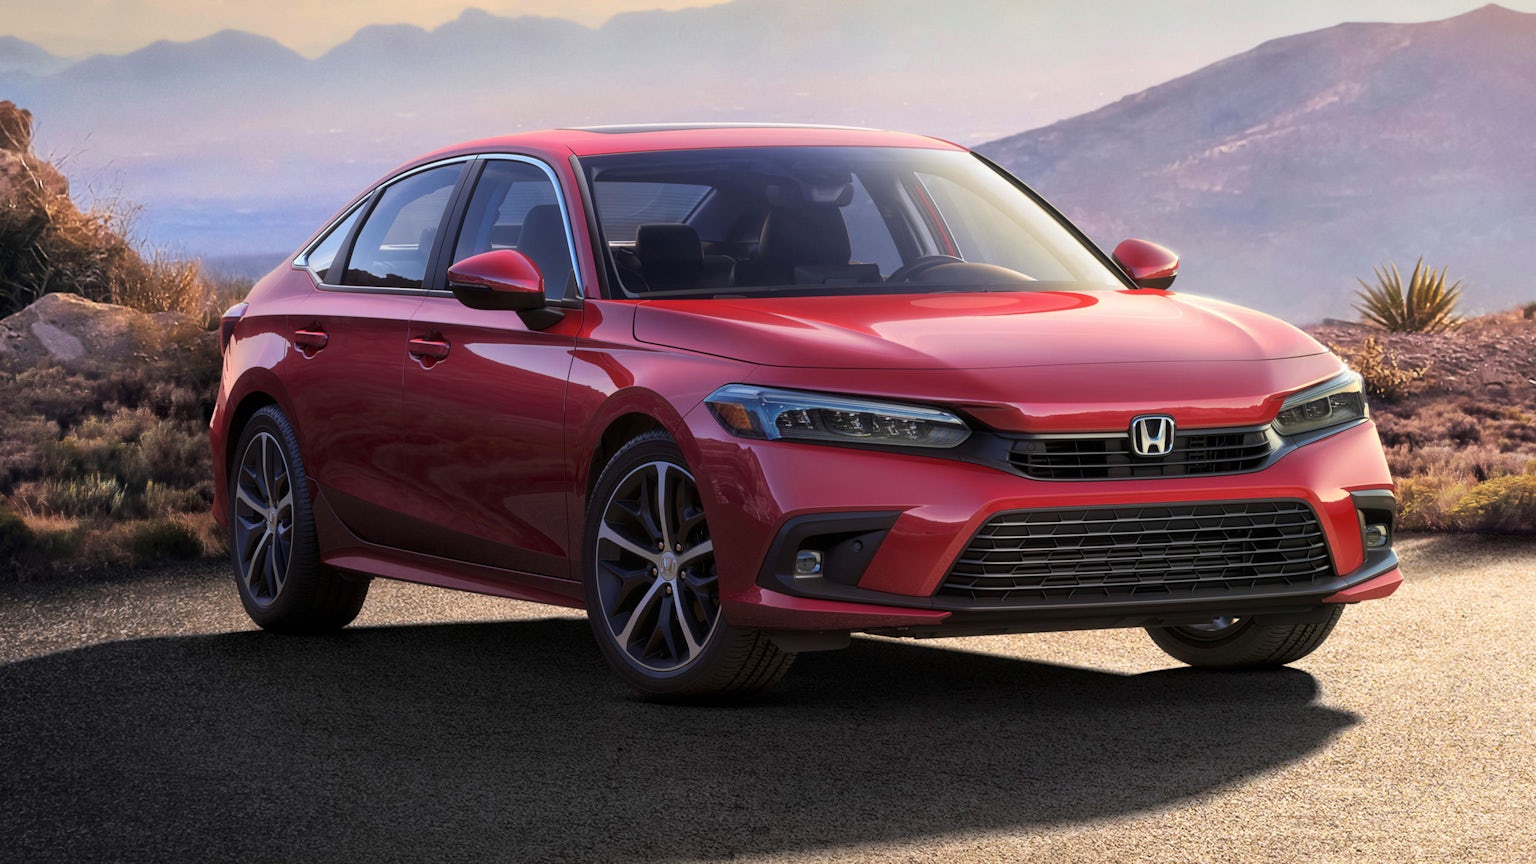 New 2022 Honda Civic Saloon revealed: prices, specs and release date